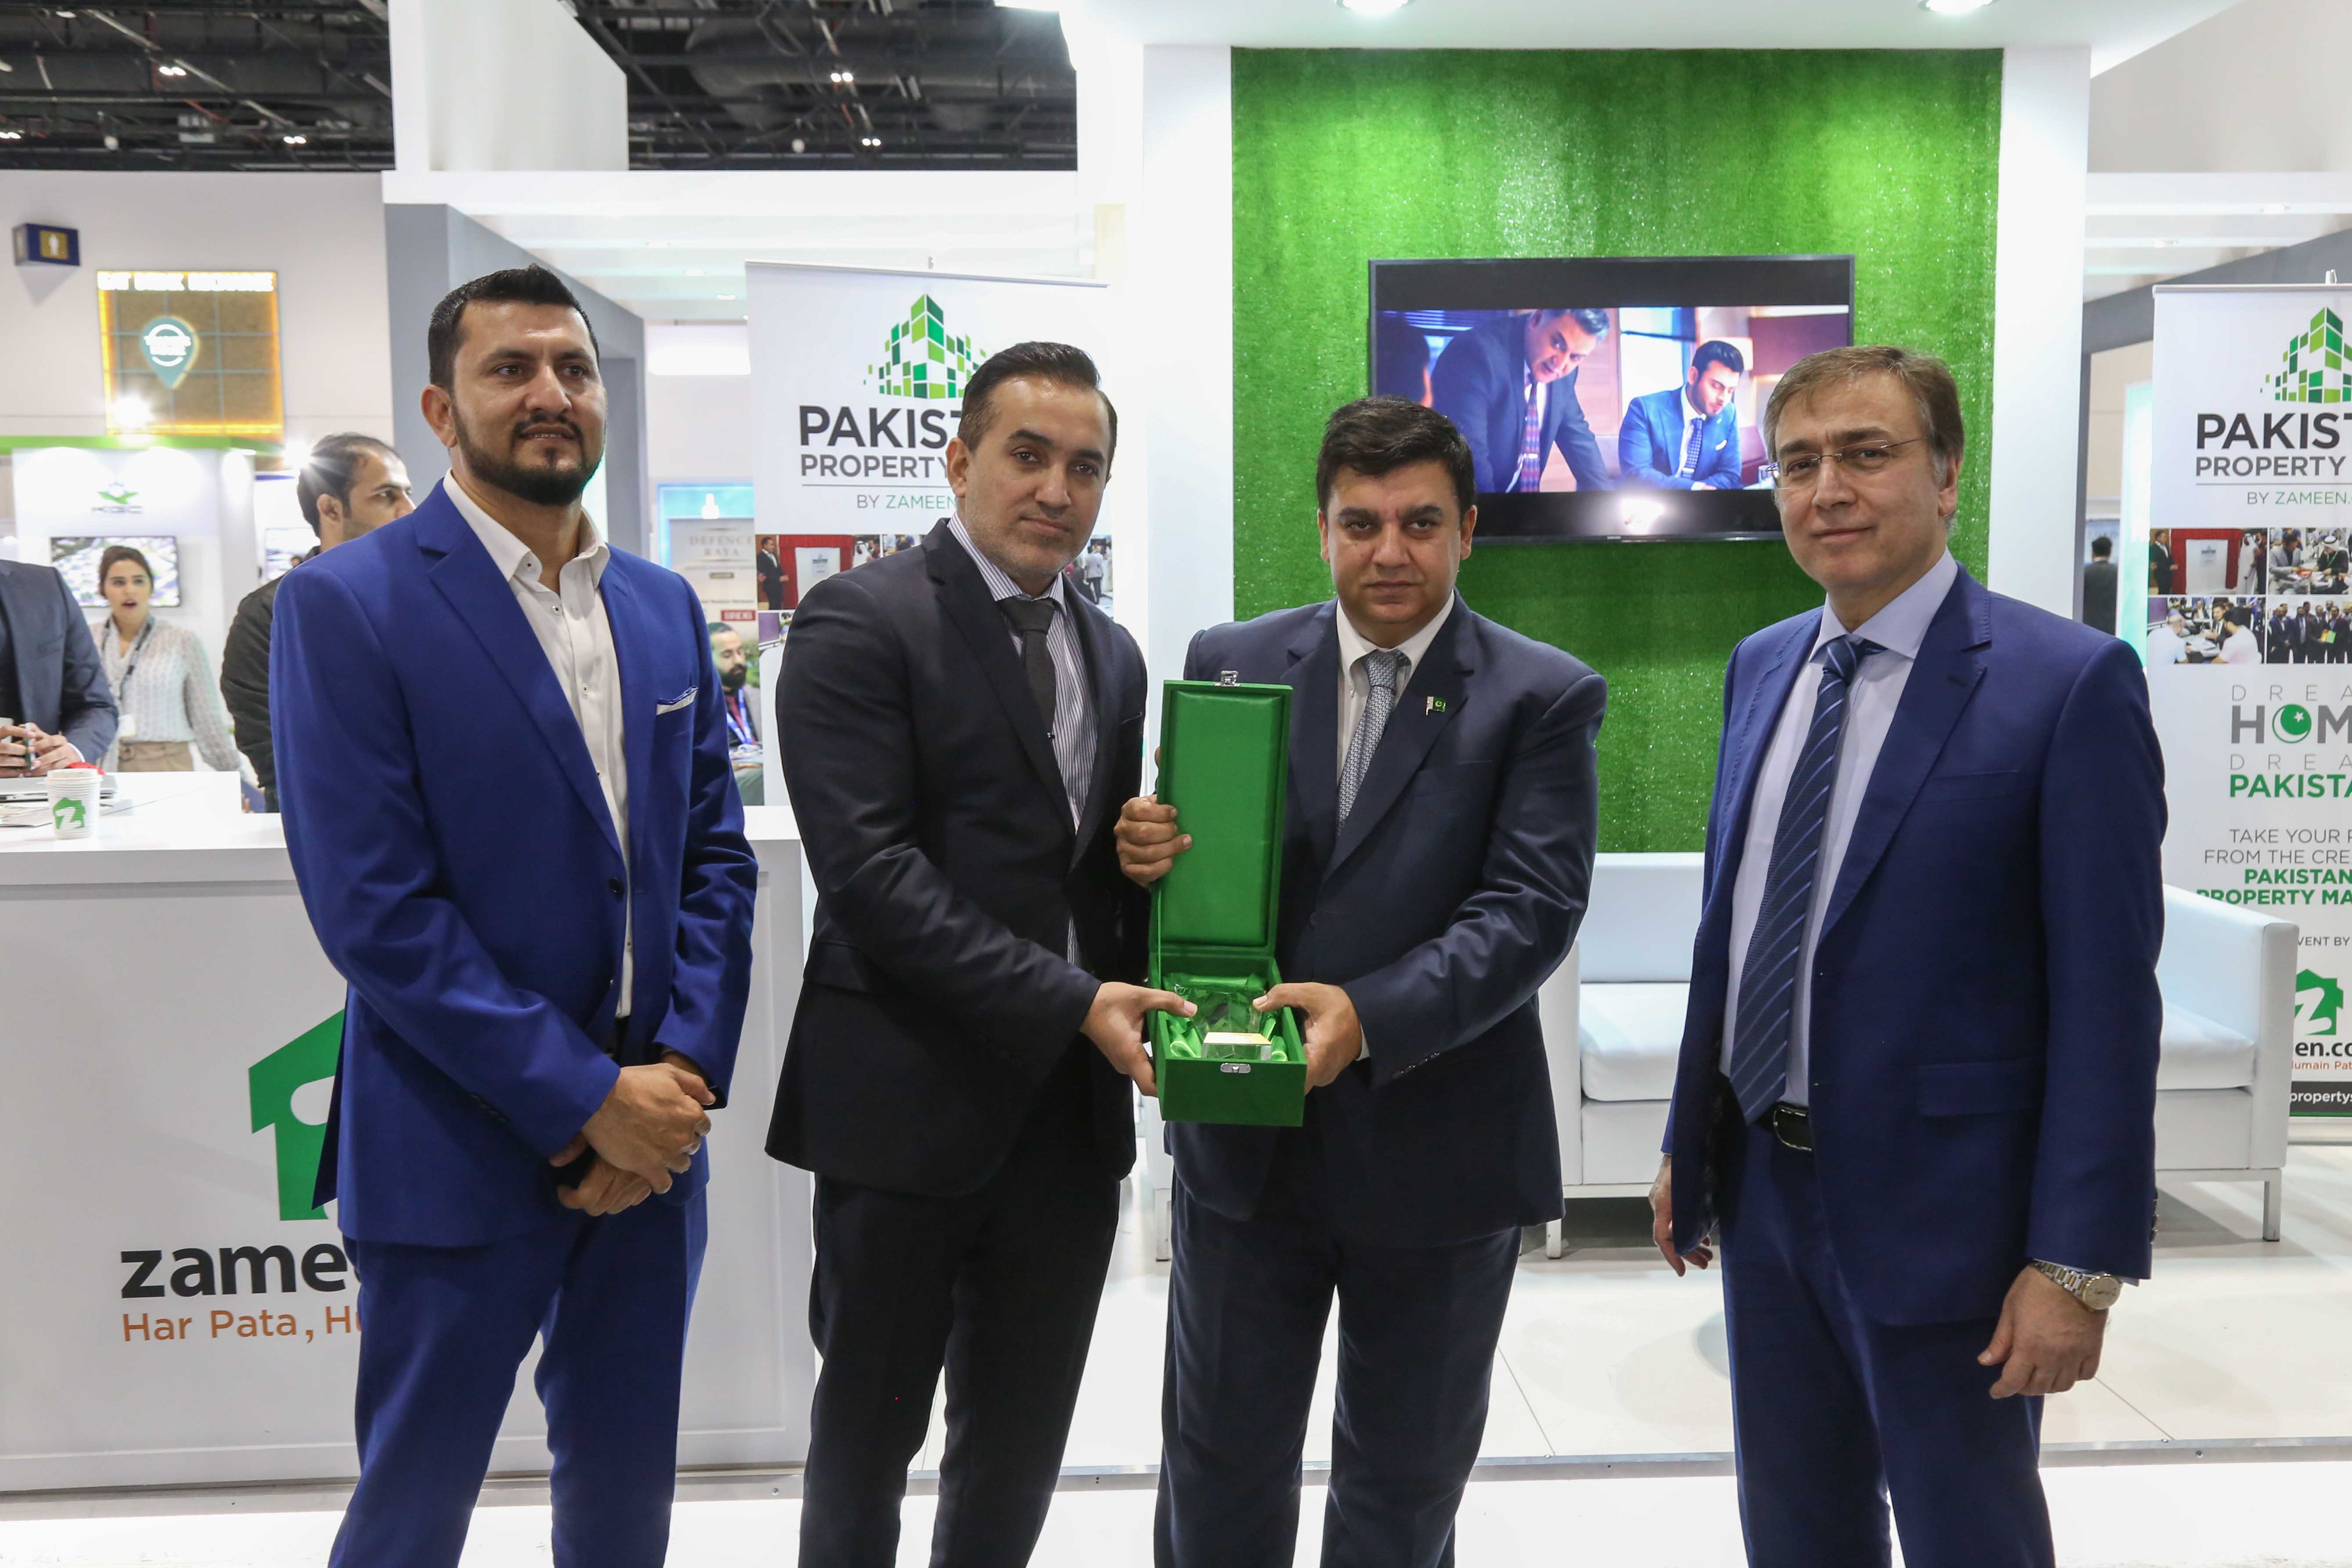 Pakistan Property Show concludes at Dubai World Trade Centre, attracts more than 20,000 visitors